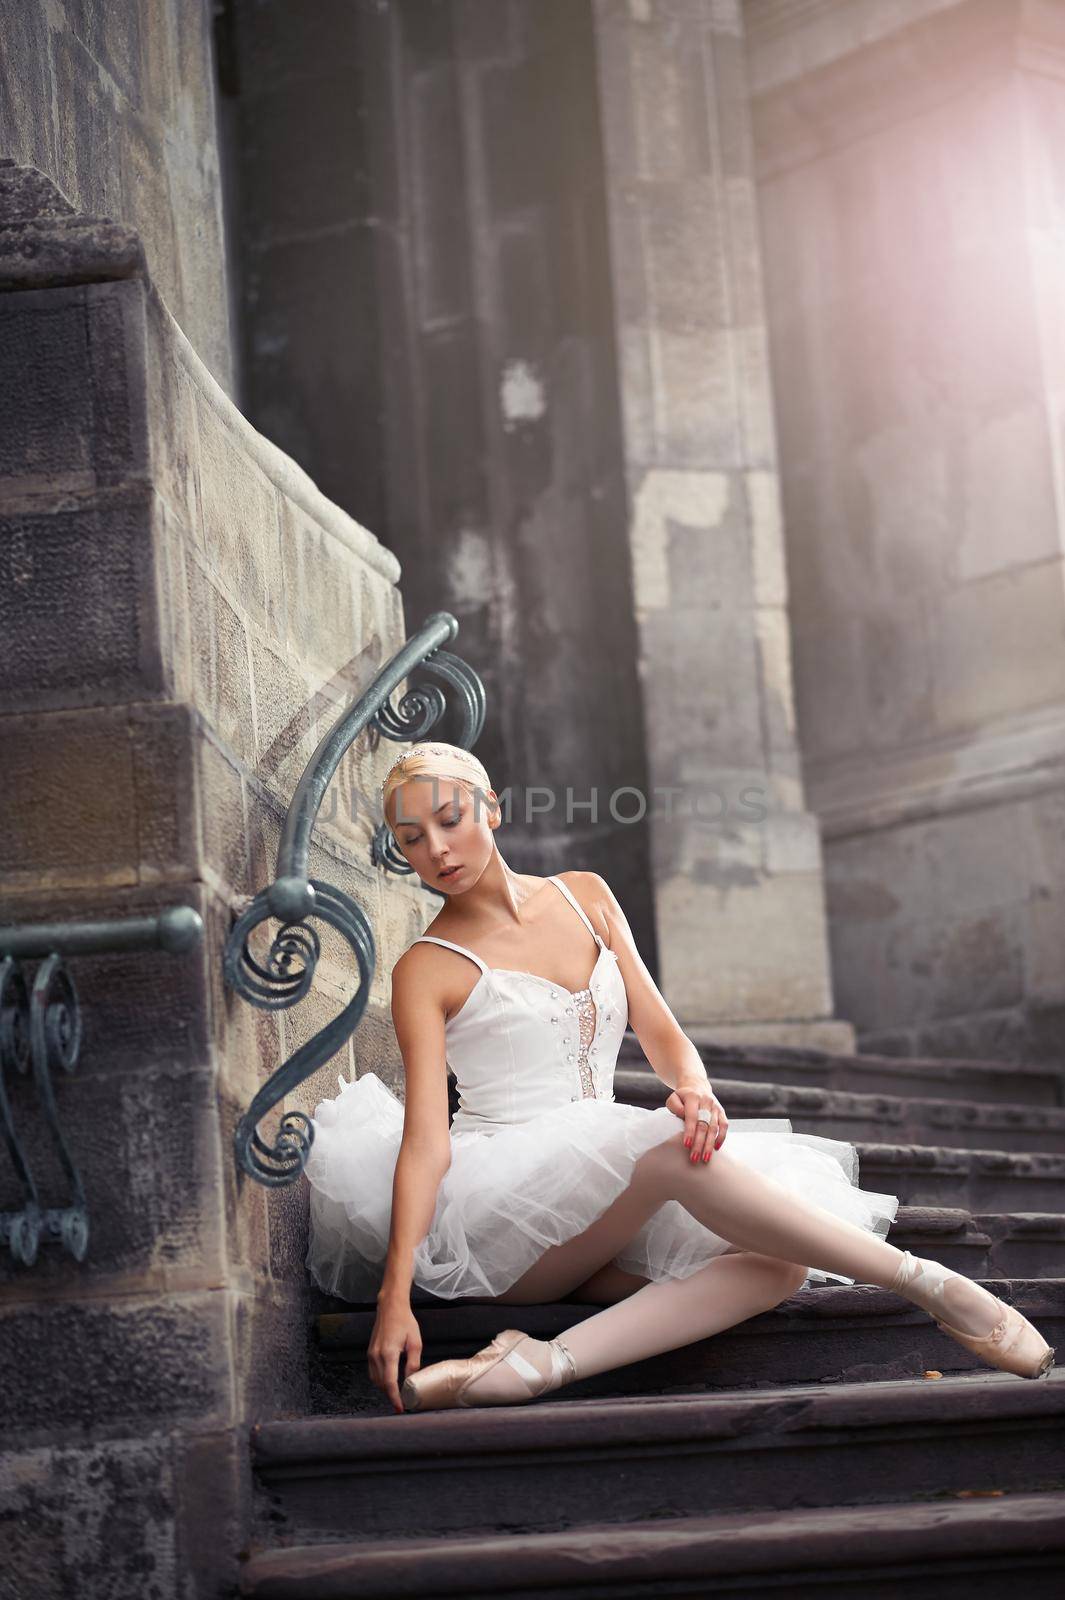 Passion in every curve. Shot of a stunning ballerina resting near on old castle on the stairs